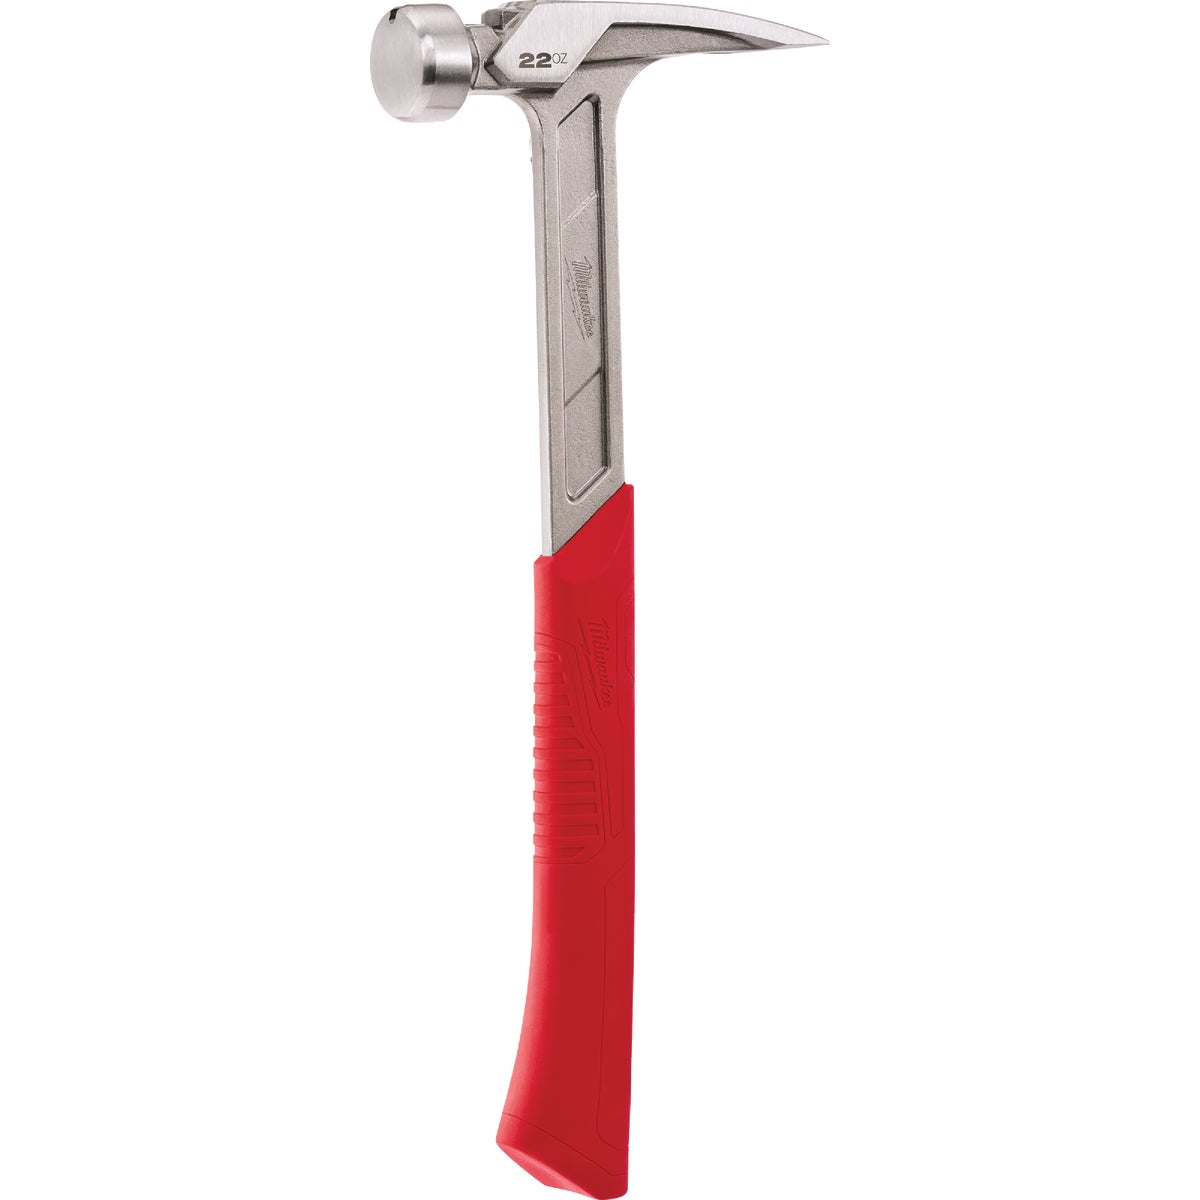 Milwaukee 22 Oz. Smooth-Face Framing Hammer with Steel I-Beam Handle